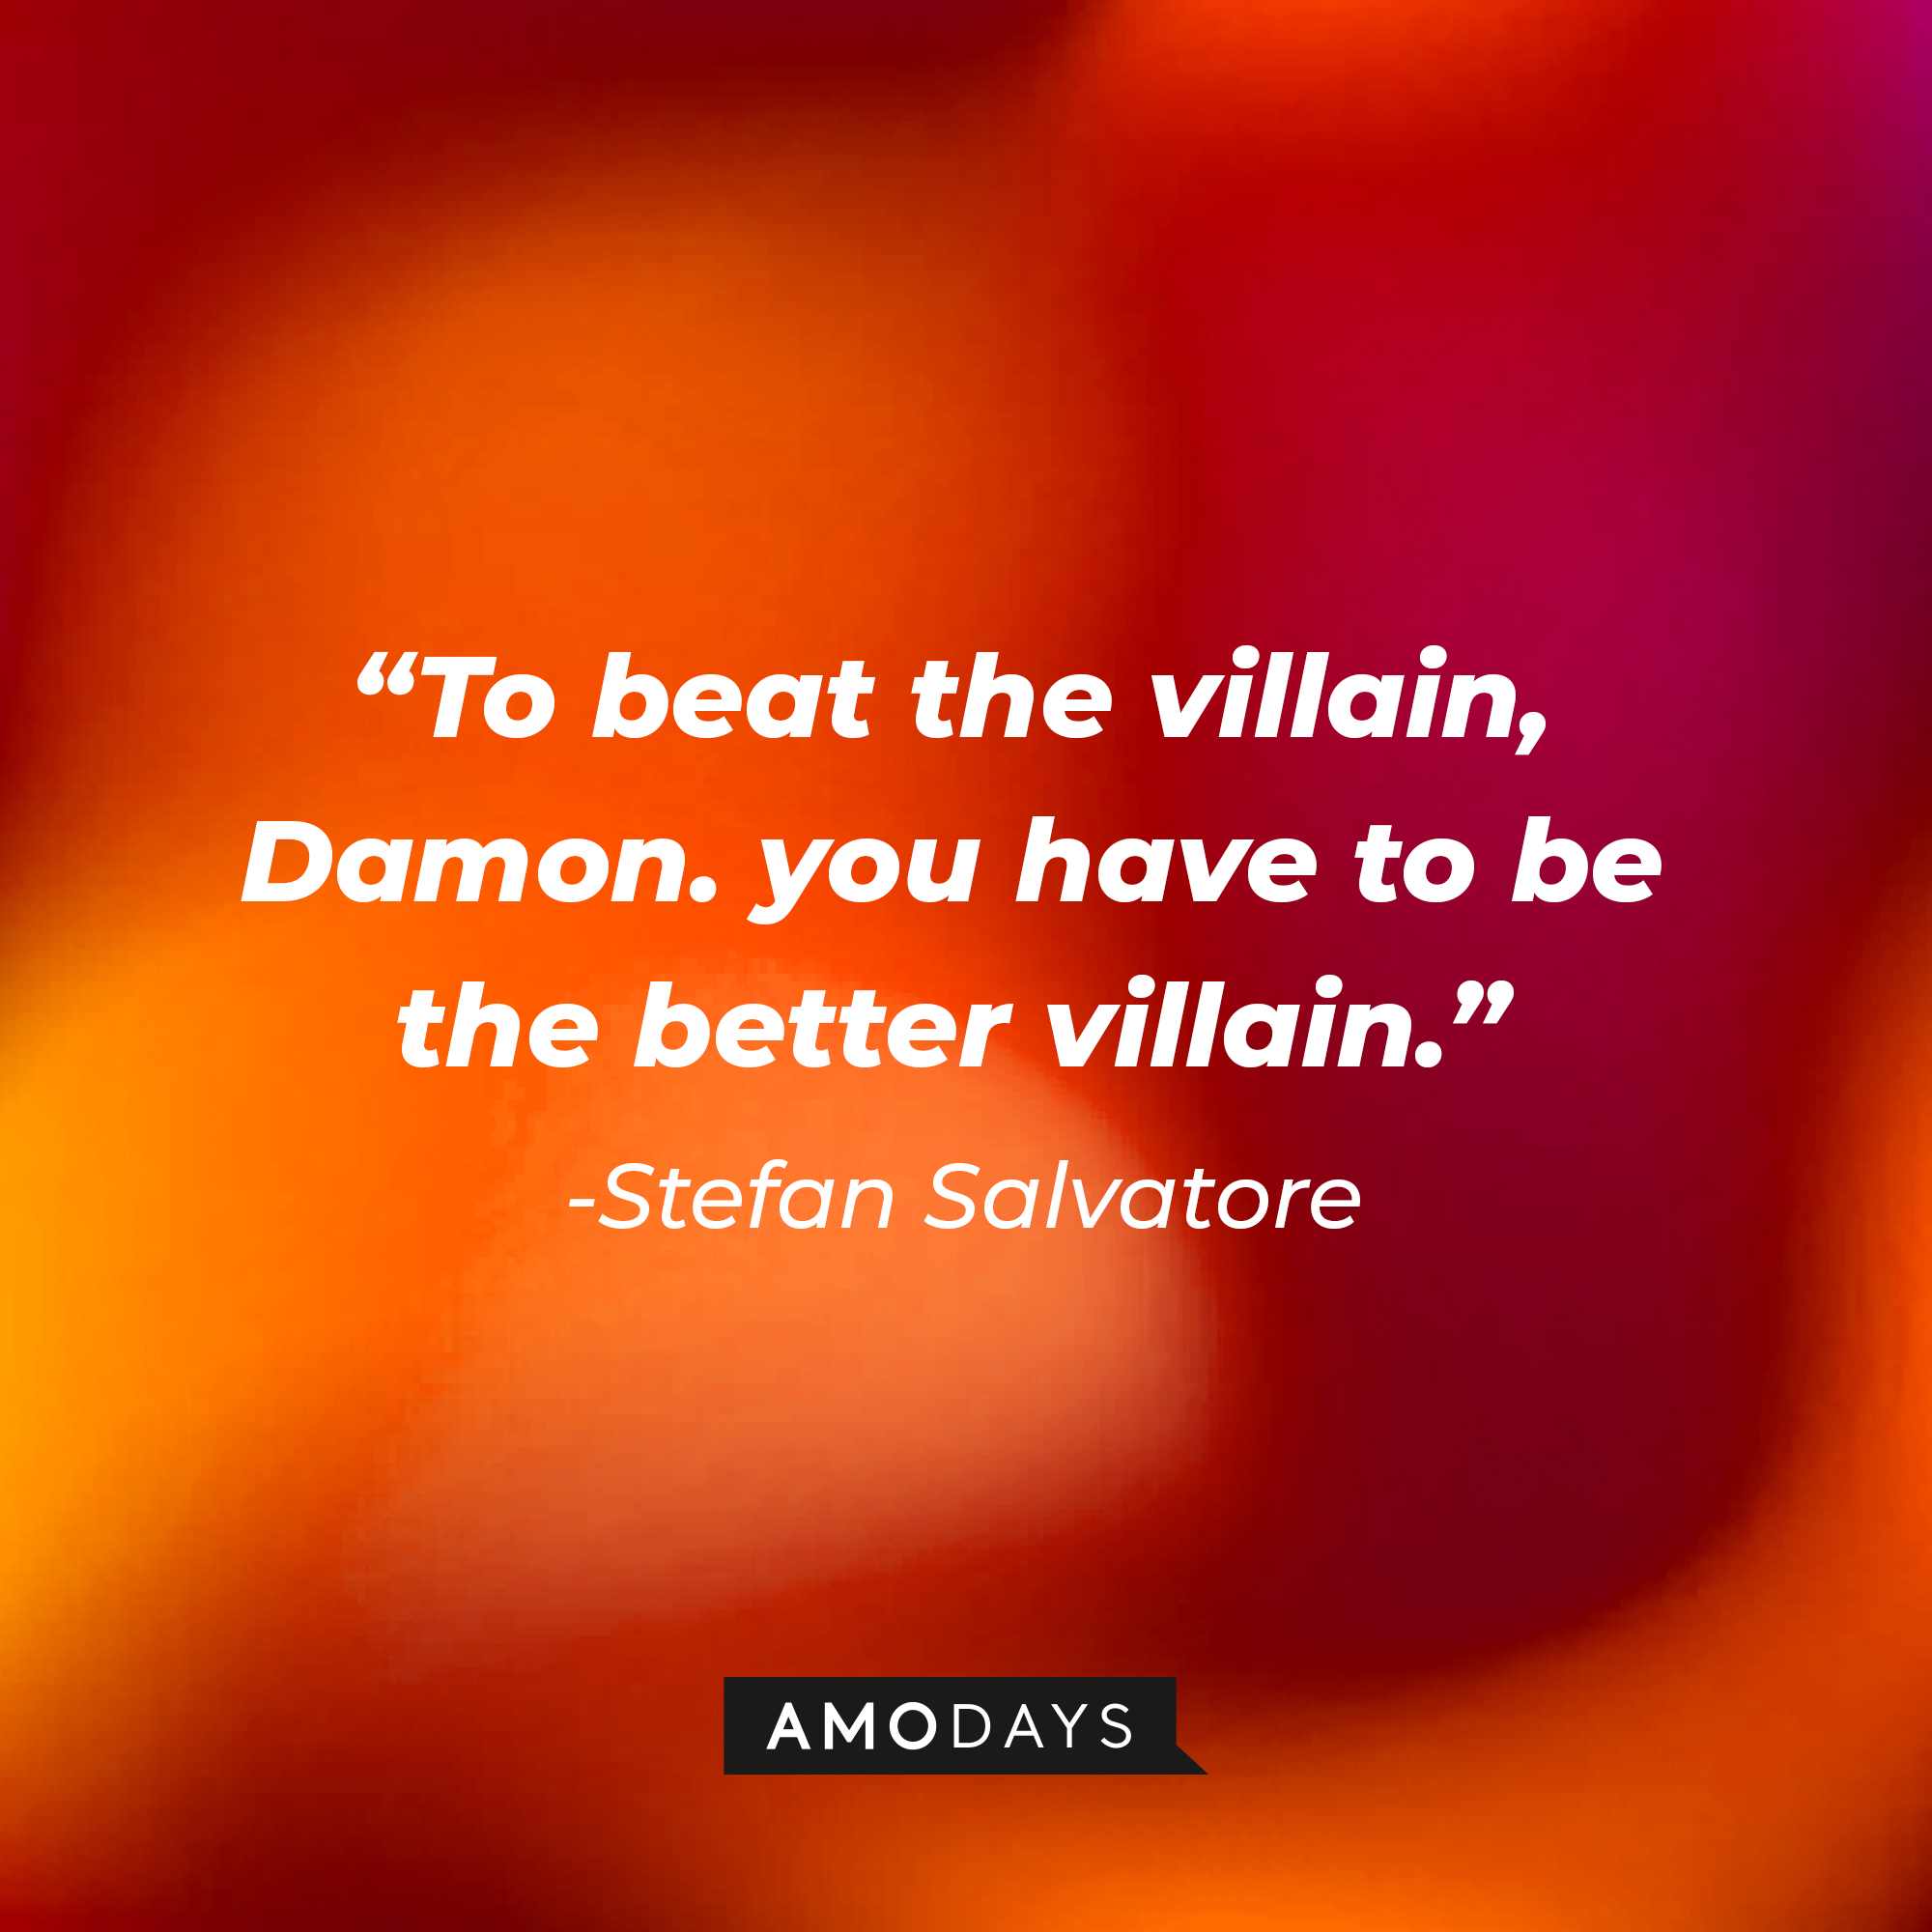 Stefan Salvatore's quote: "To beat the villain, Damon. you have to be the better villain." | Source: AmoDays